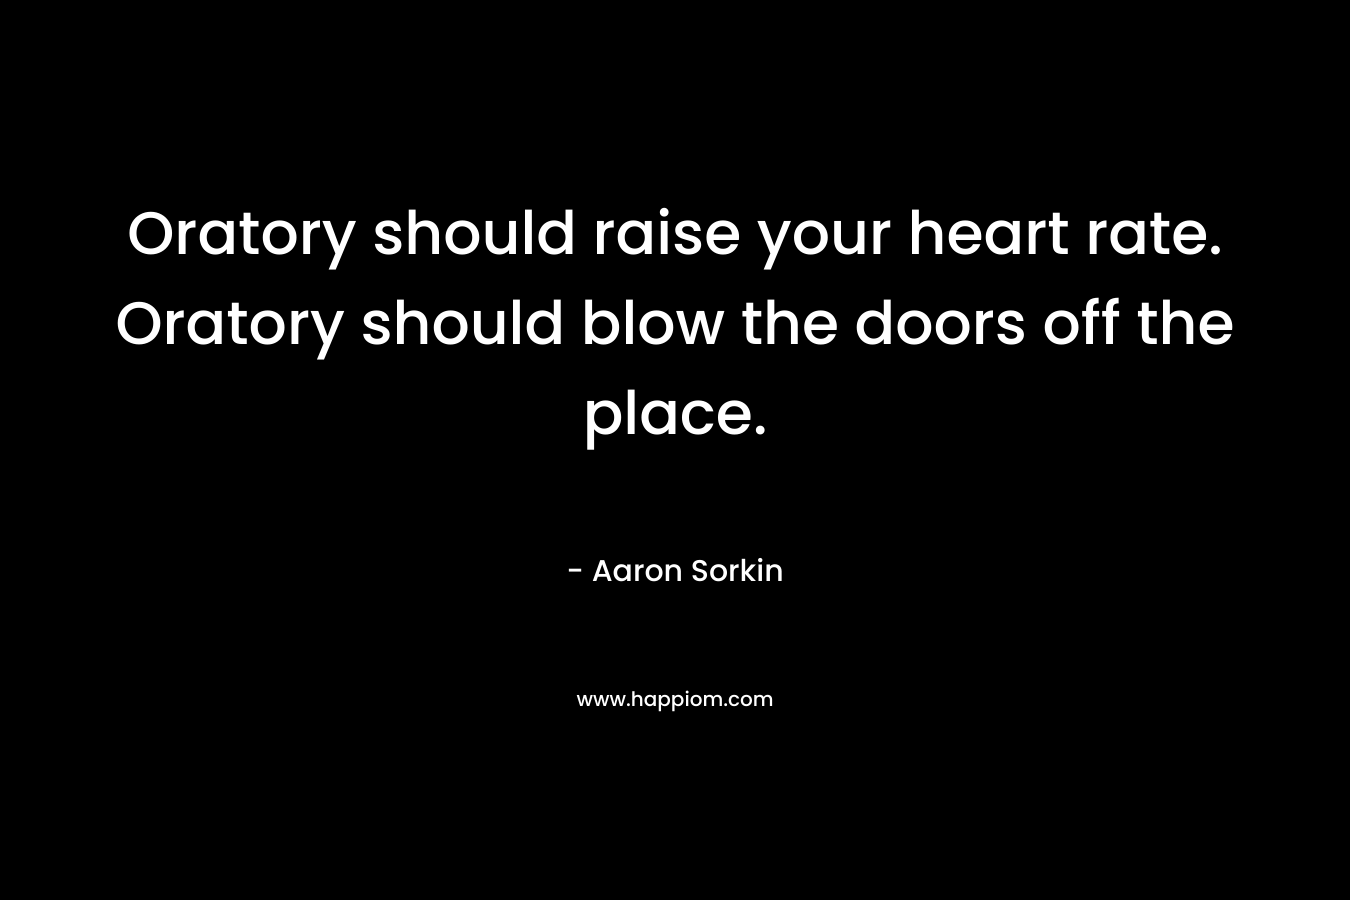 Oratory should raise your heart rate. Oratory should blow the doors off the place. – Aaron Sorkin